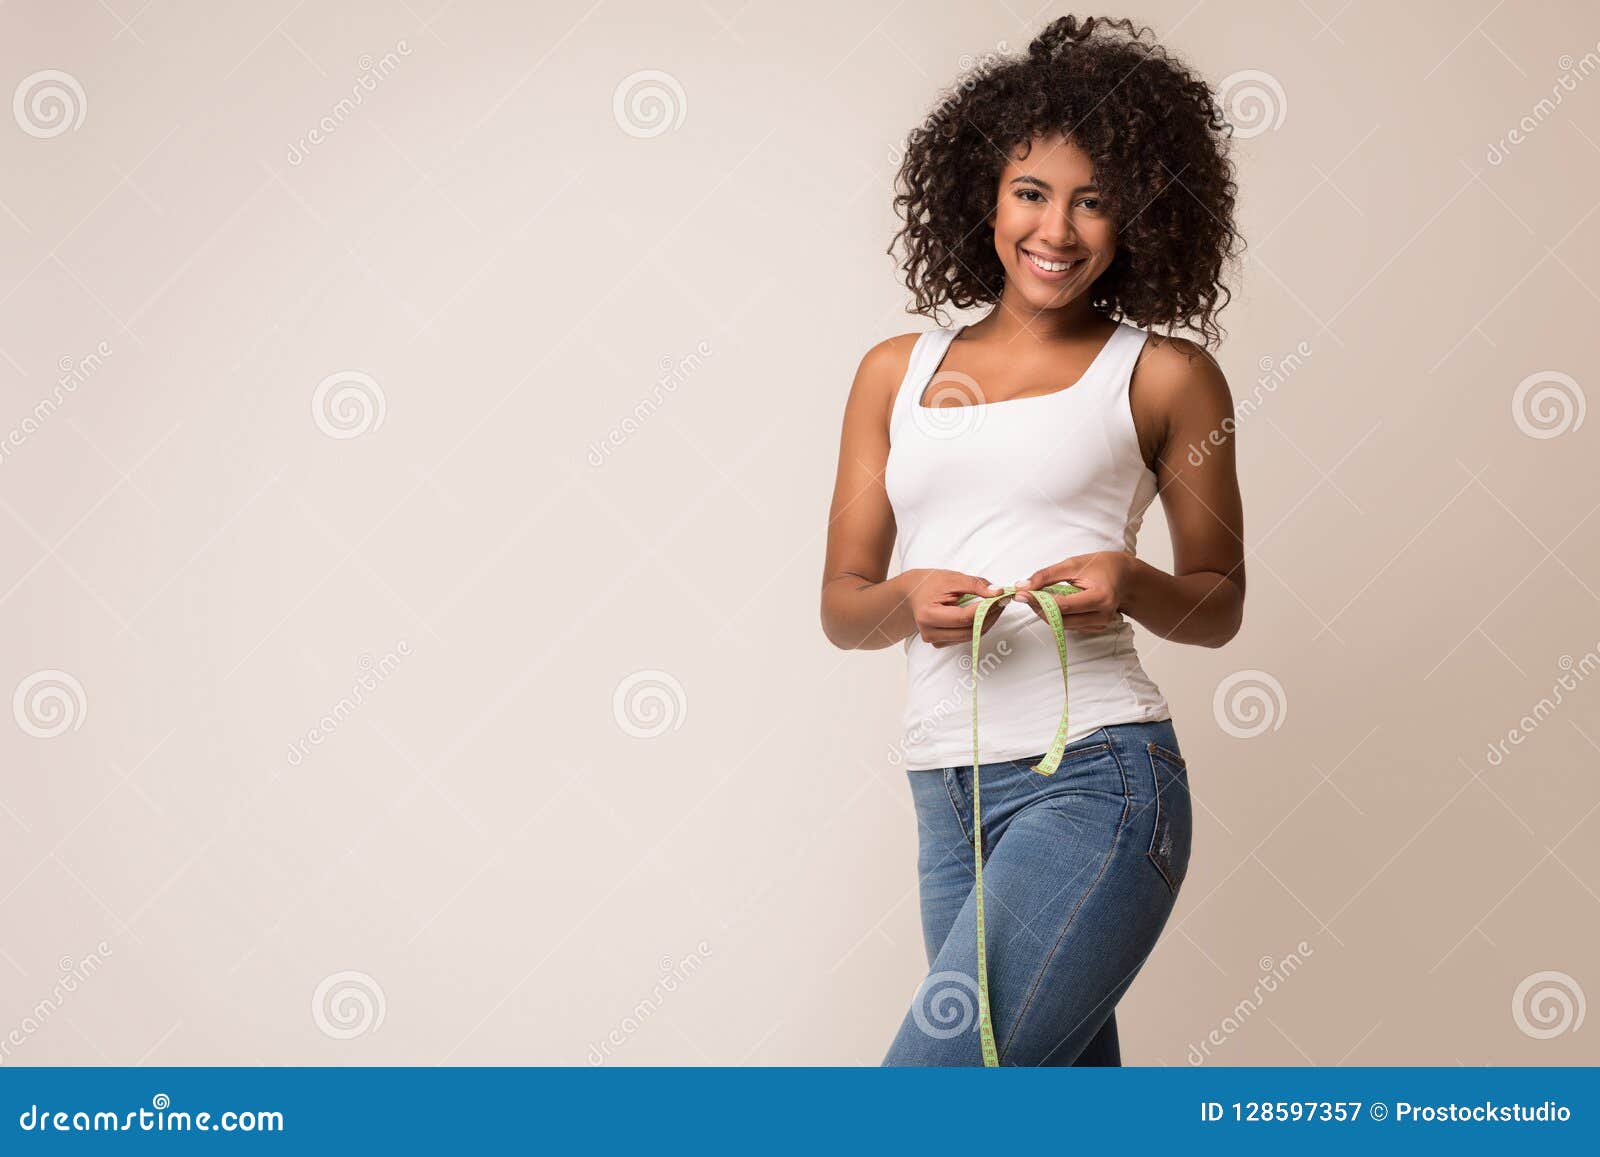 happy african-american woman measuring waist with tape